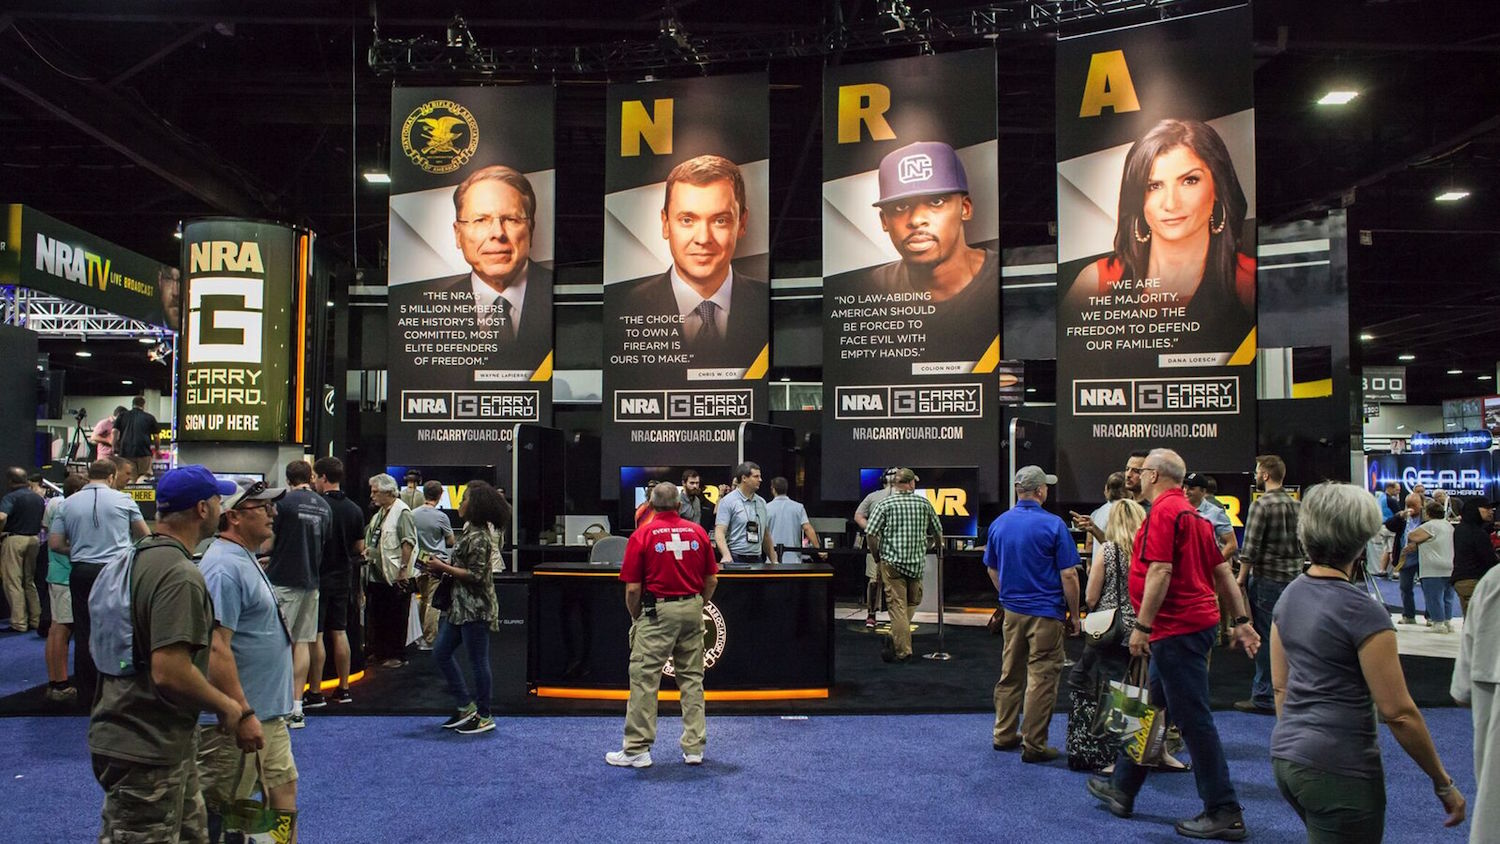 NRA Annual Meetings And Exhibits Honored Among BizBash Top 100 Events In U.S.